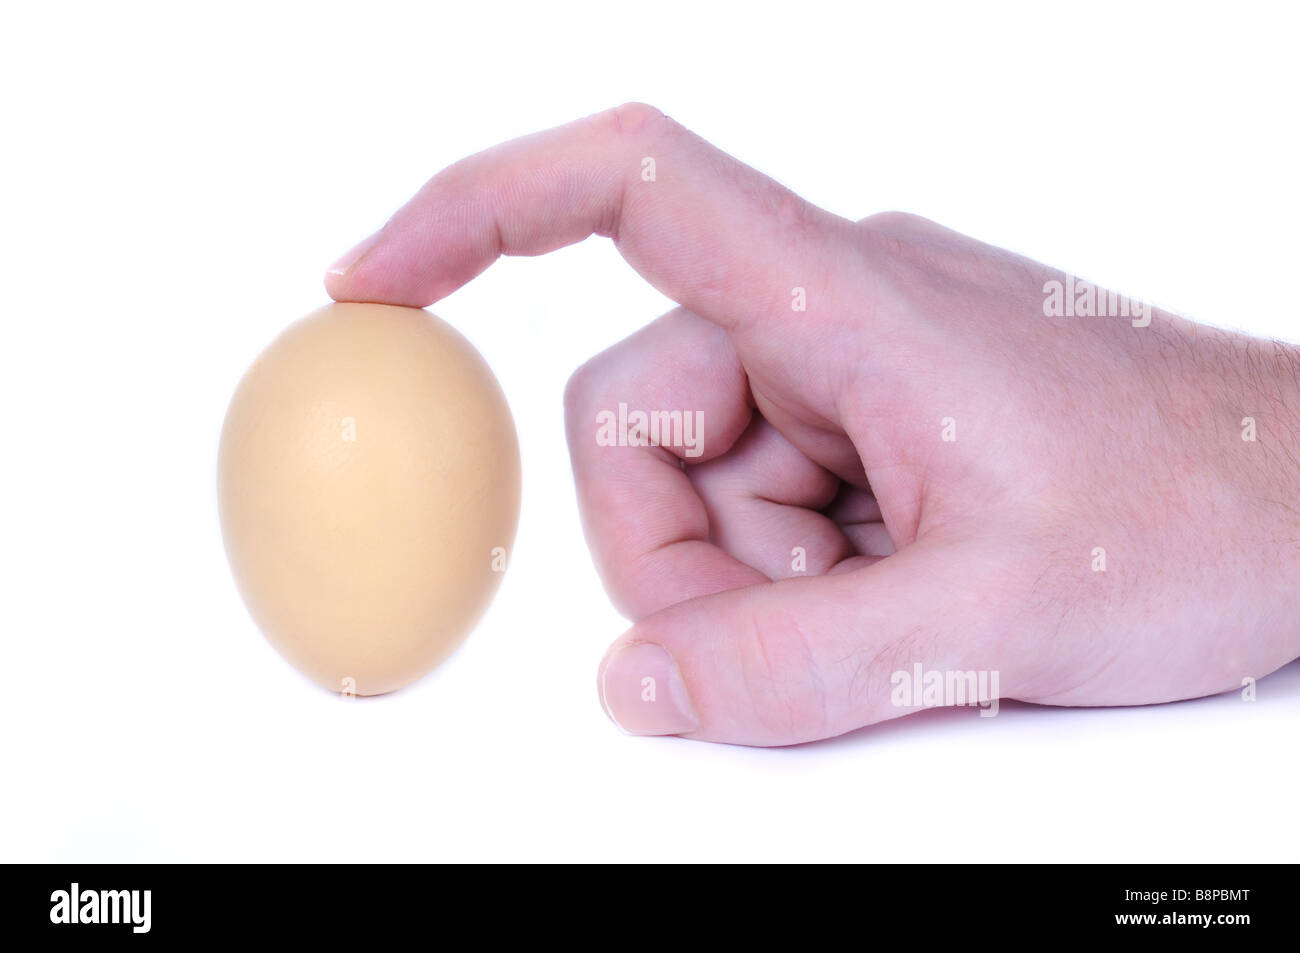 The Egg of Columbus - hand trying to make an egg stand on the tip. Stock Photo